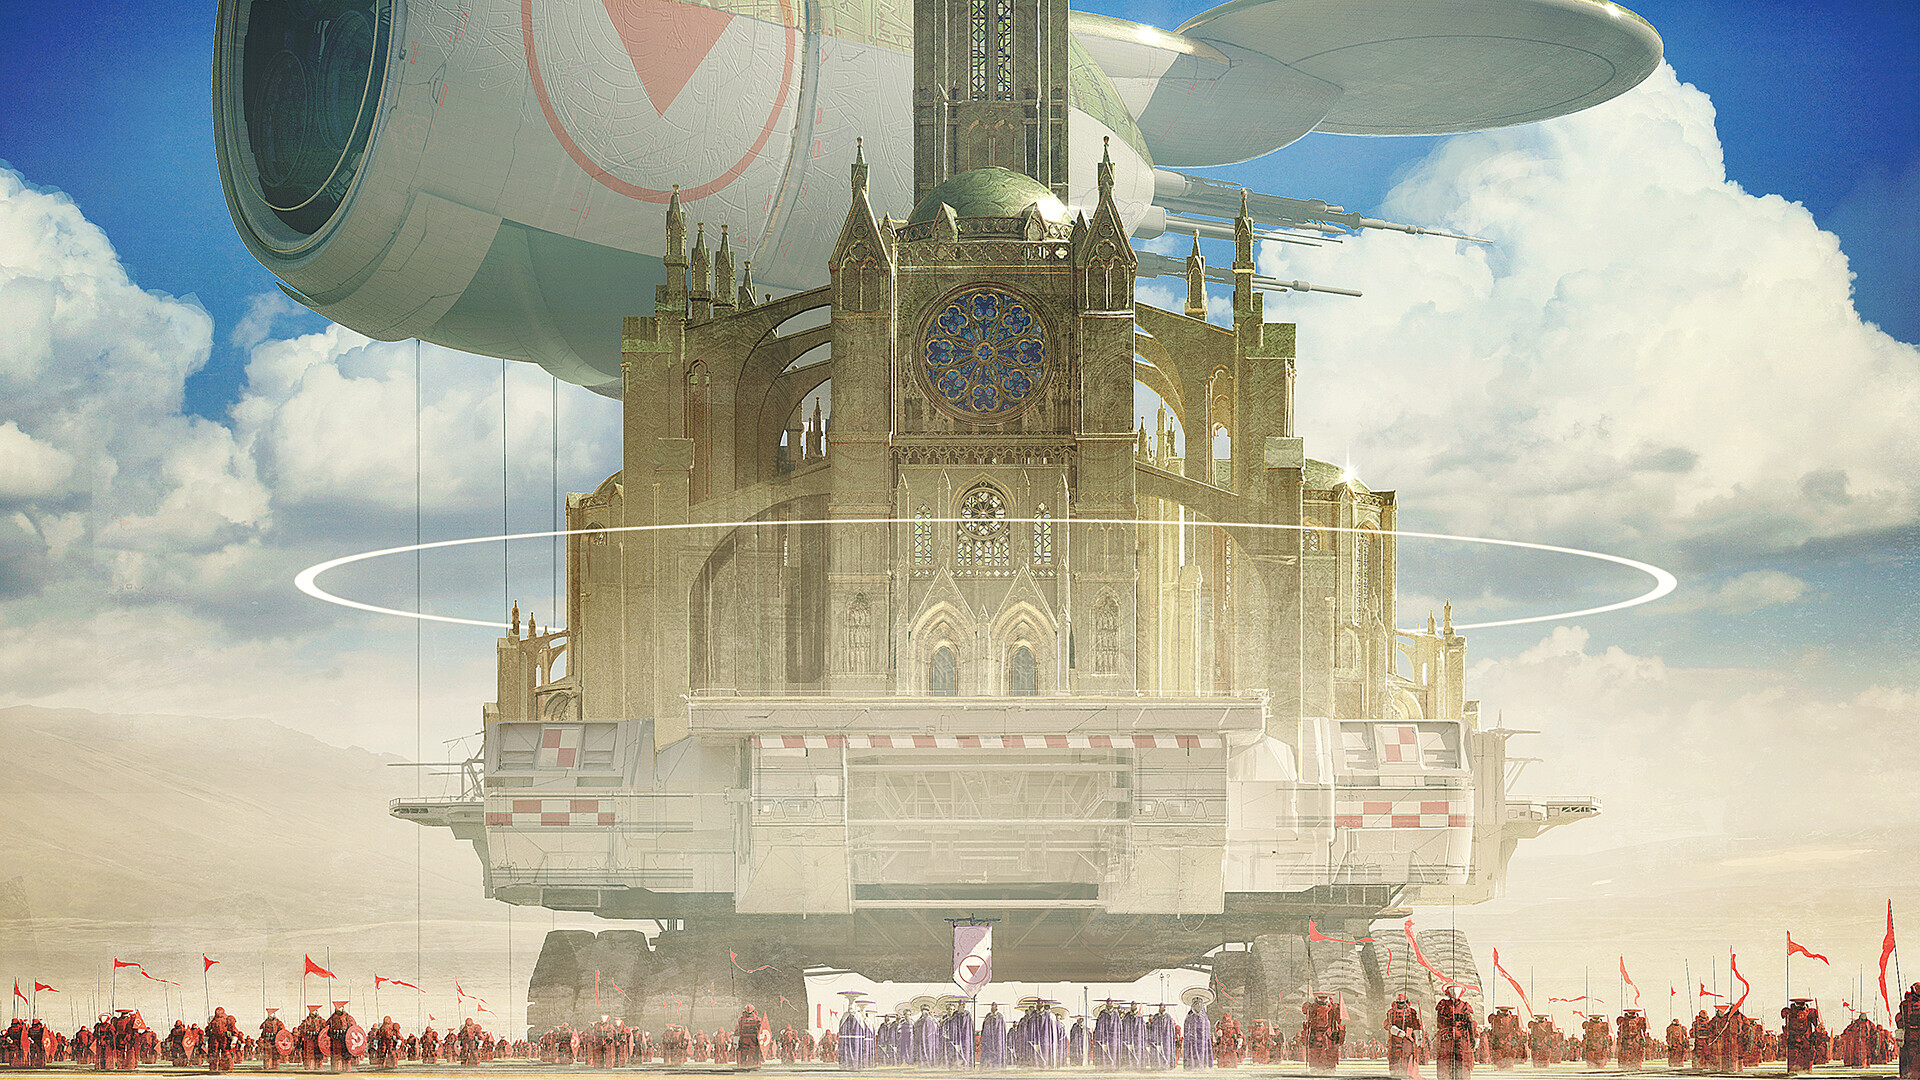 Grand Space Opera: Light Age / The cathedral by DOFRESH .